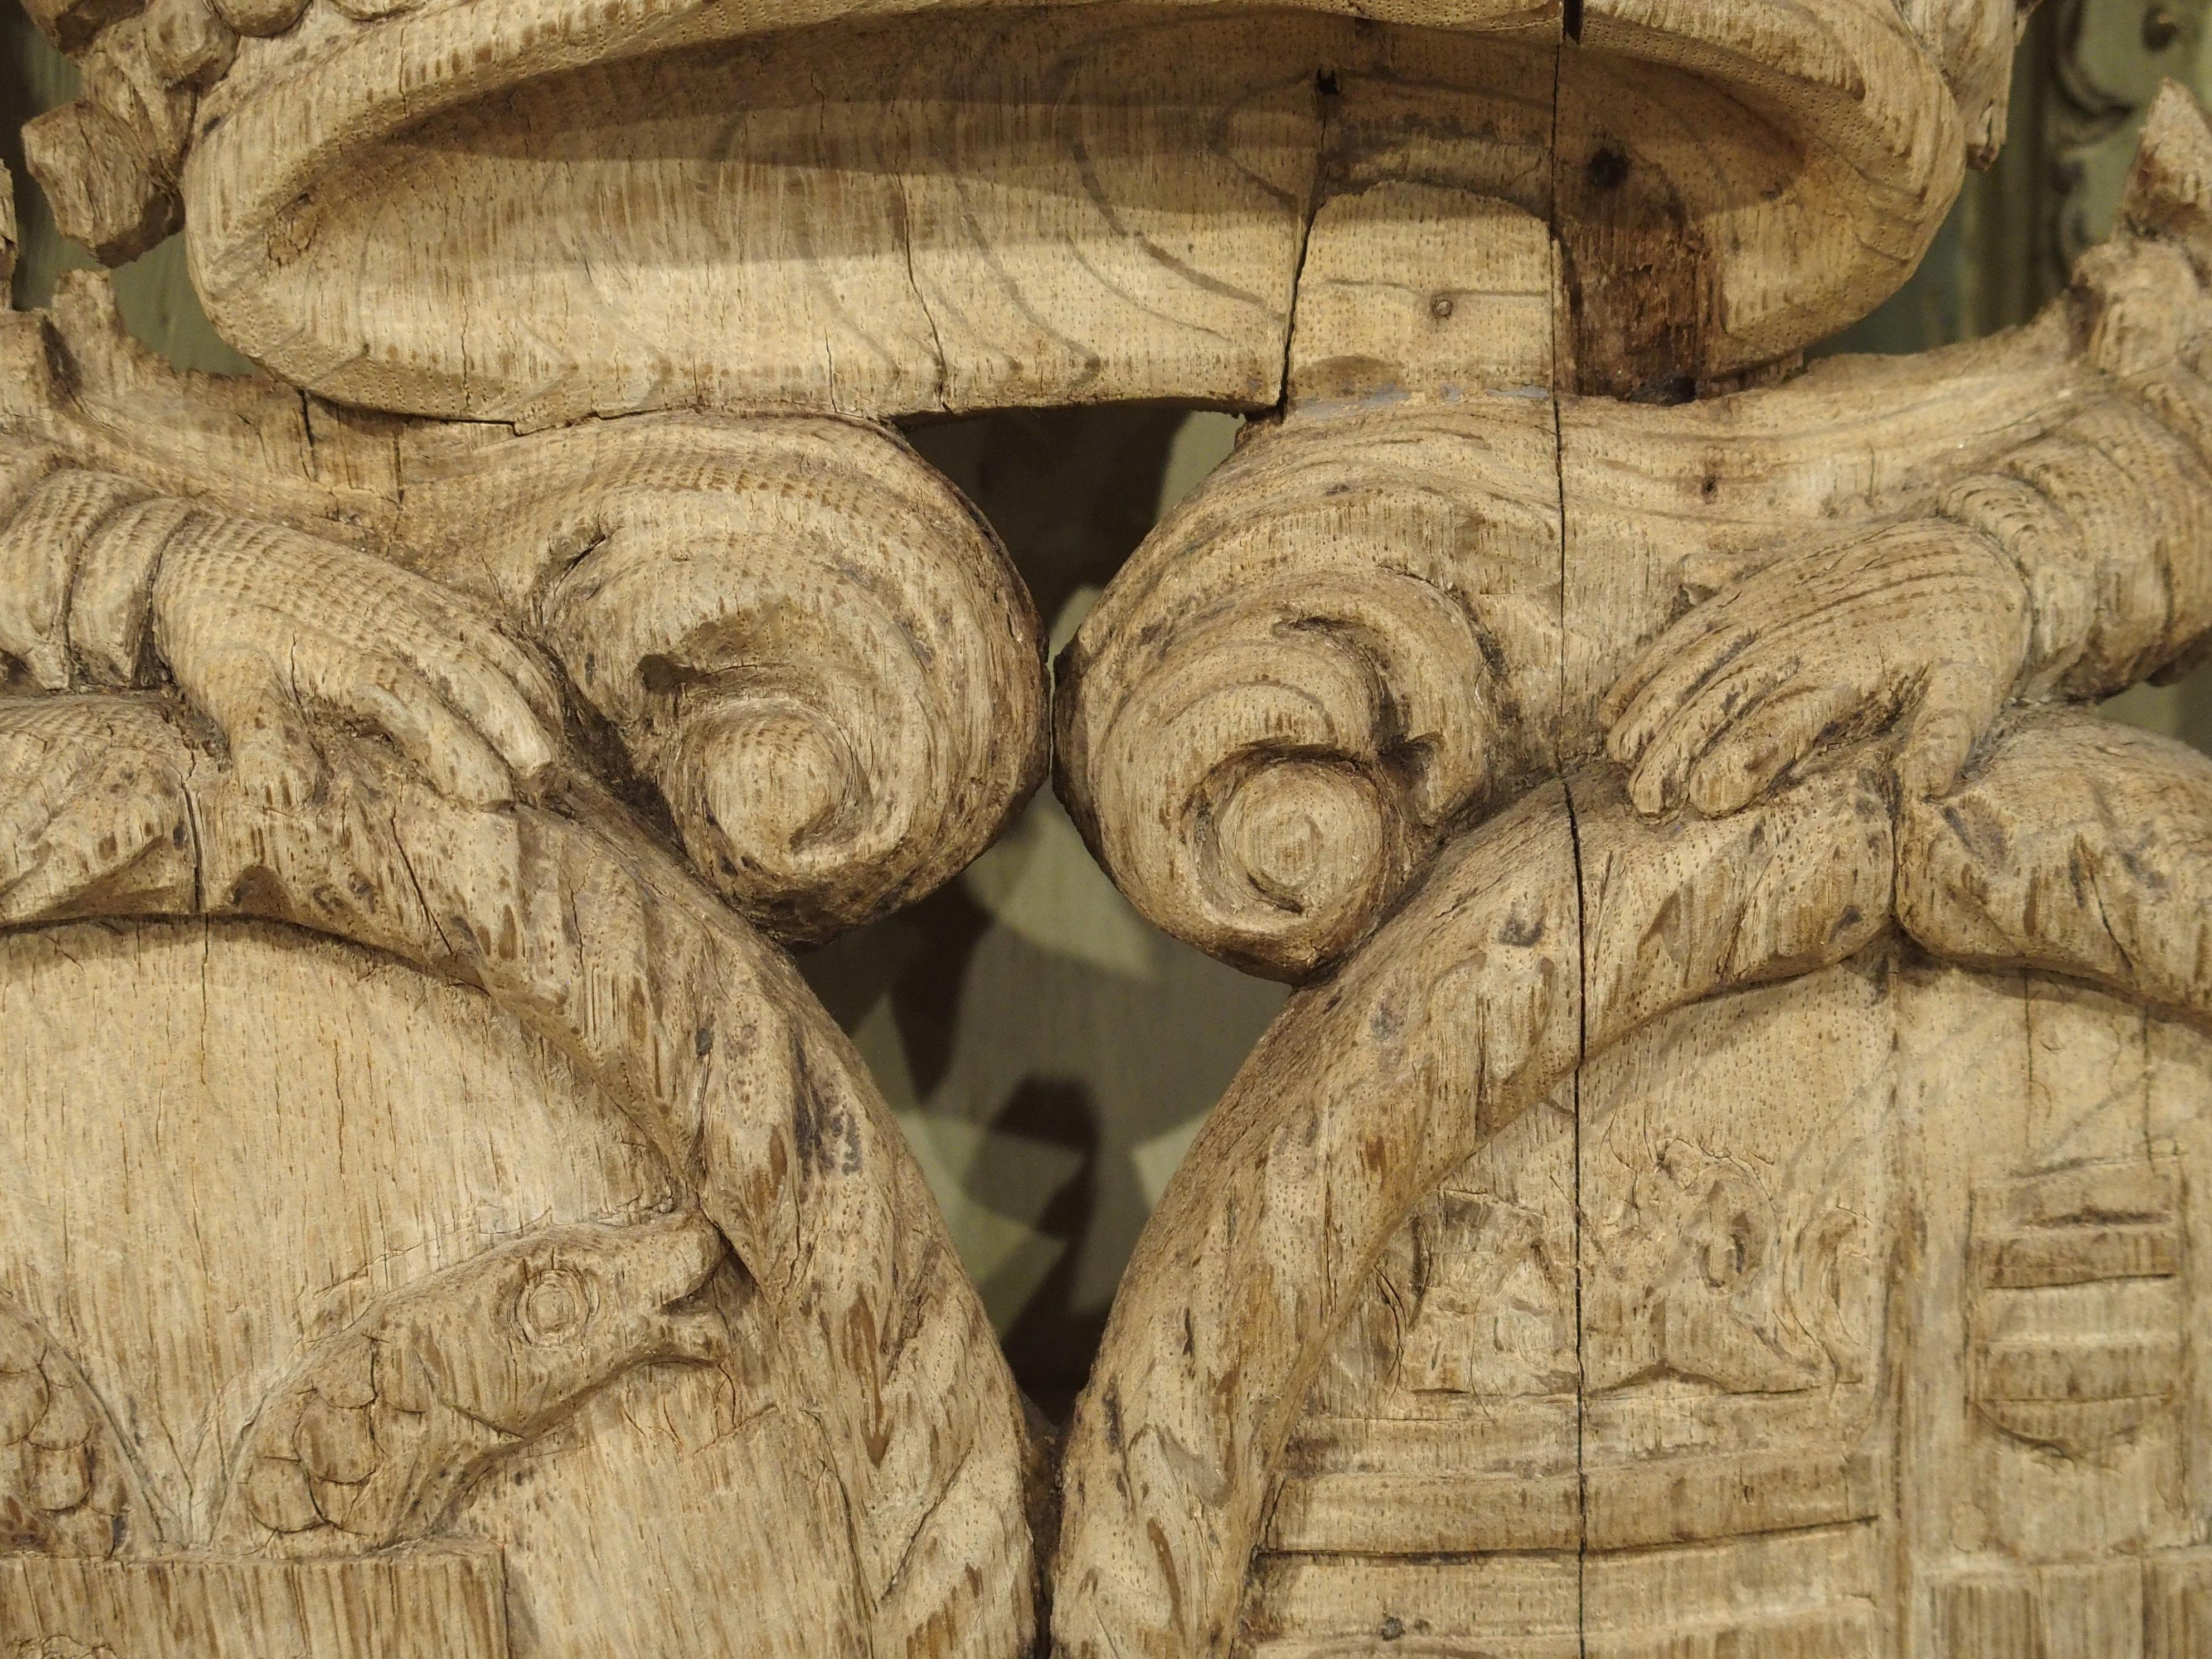 This wonderfully weathered 250-300 year old sculpture was carved in France out of Oak. It depicts two guardians flanking a noble coat of arms, surmounted by a bejeweled crown. It was most certainly part of a larger structure when originally created,